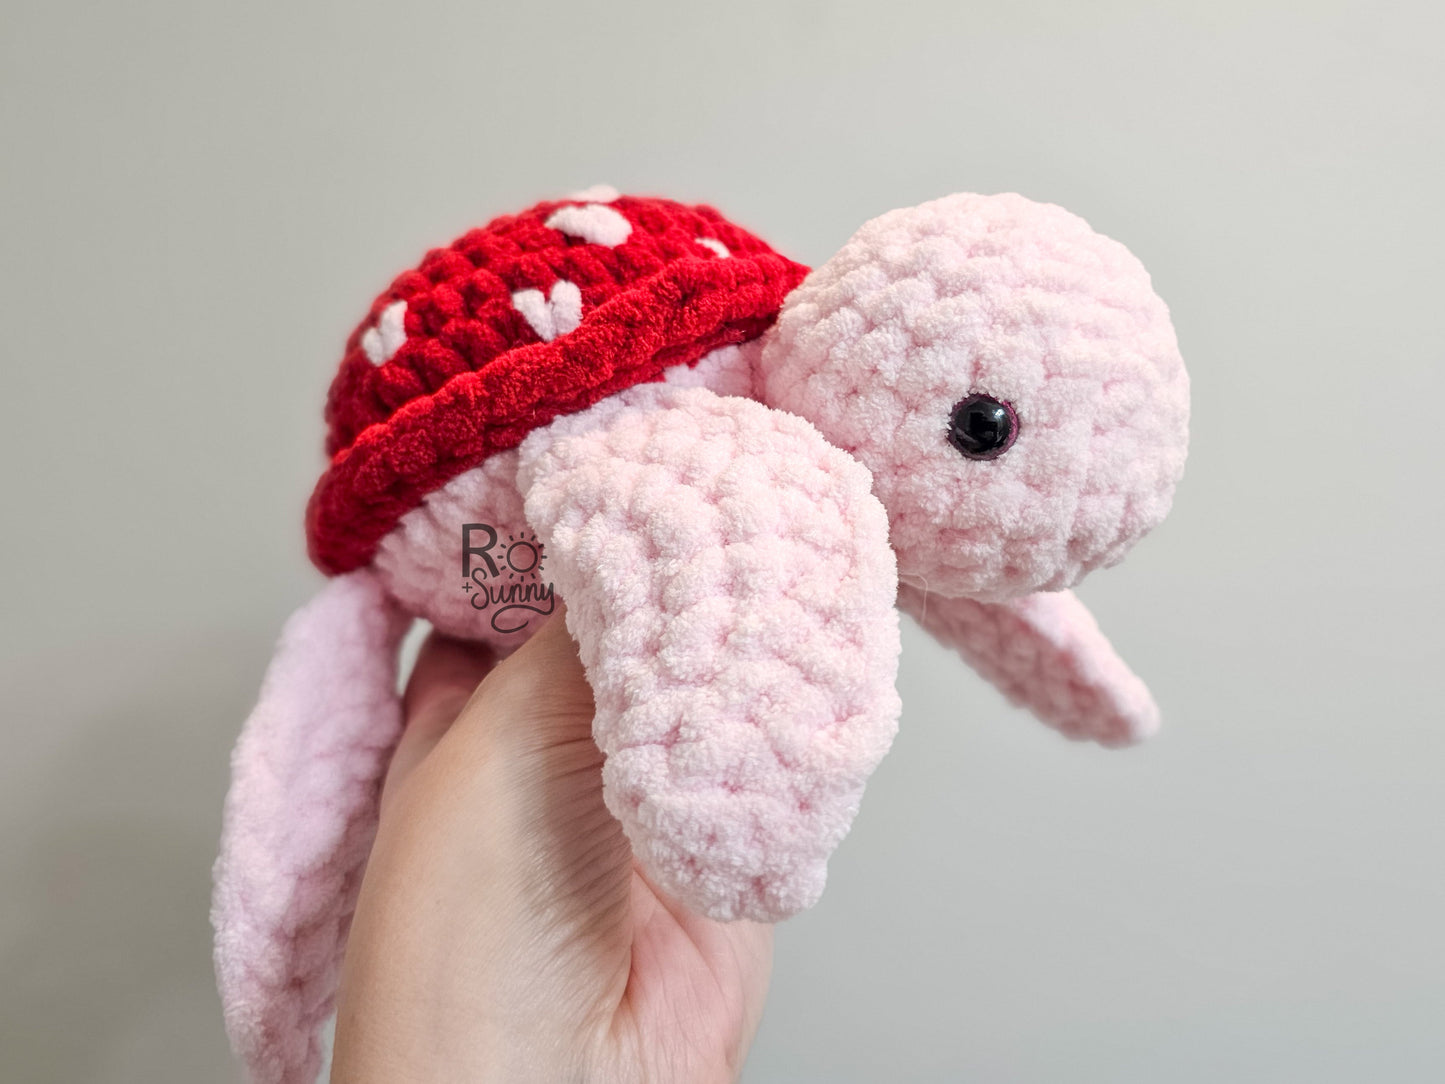 Sea of Love, Side Profile - Crochet sea turtle with a light pink body and red shell with white hearts.